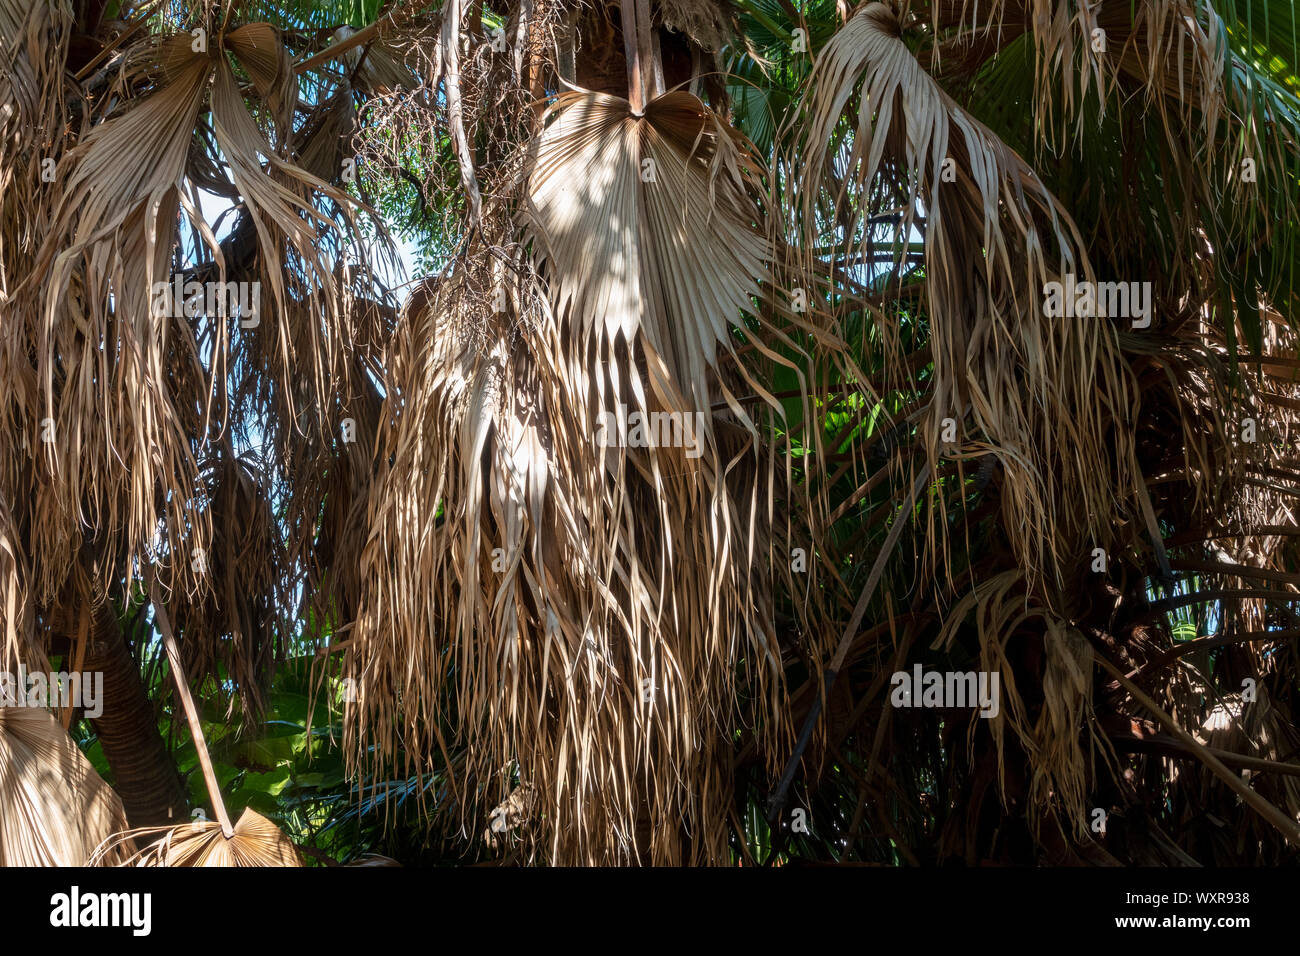 Drooping dried palm fronds Bermuda Stock Photo